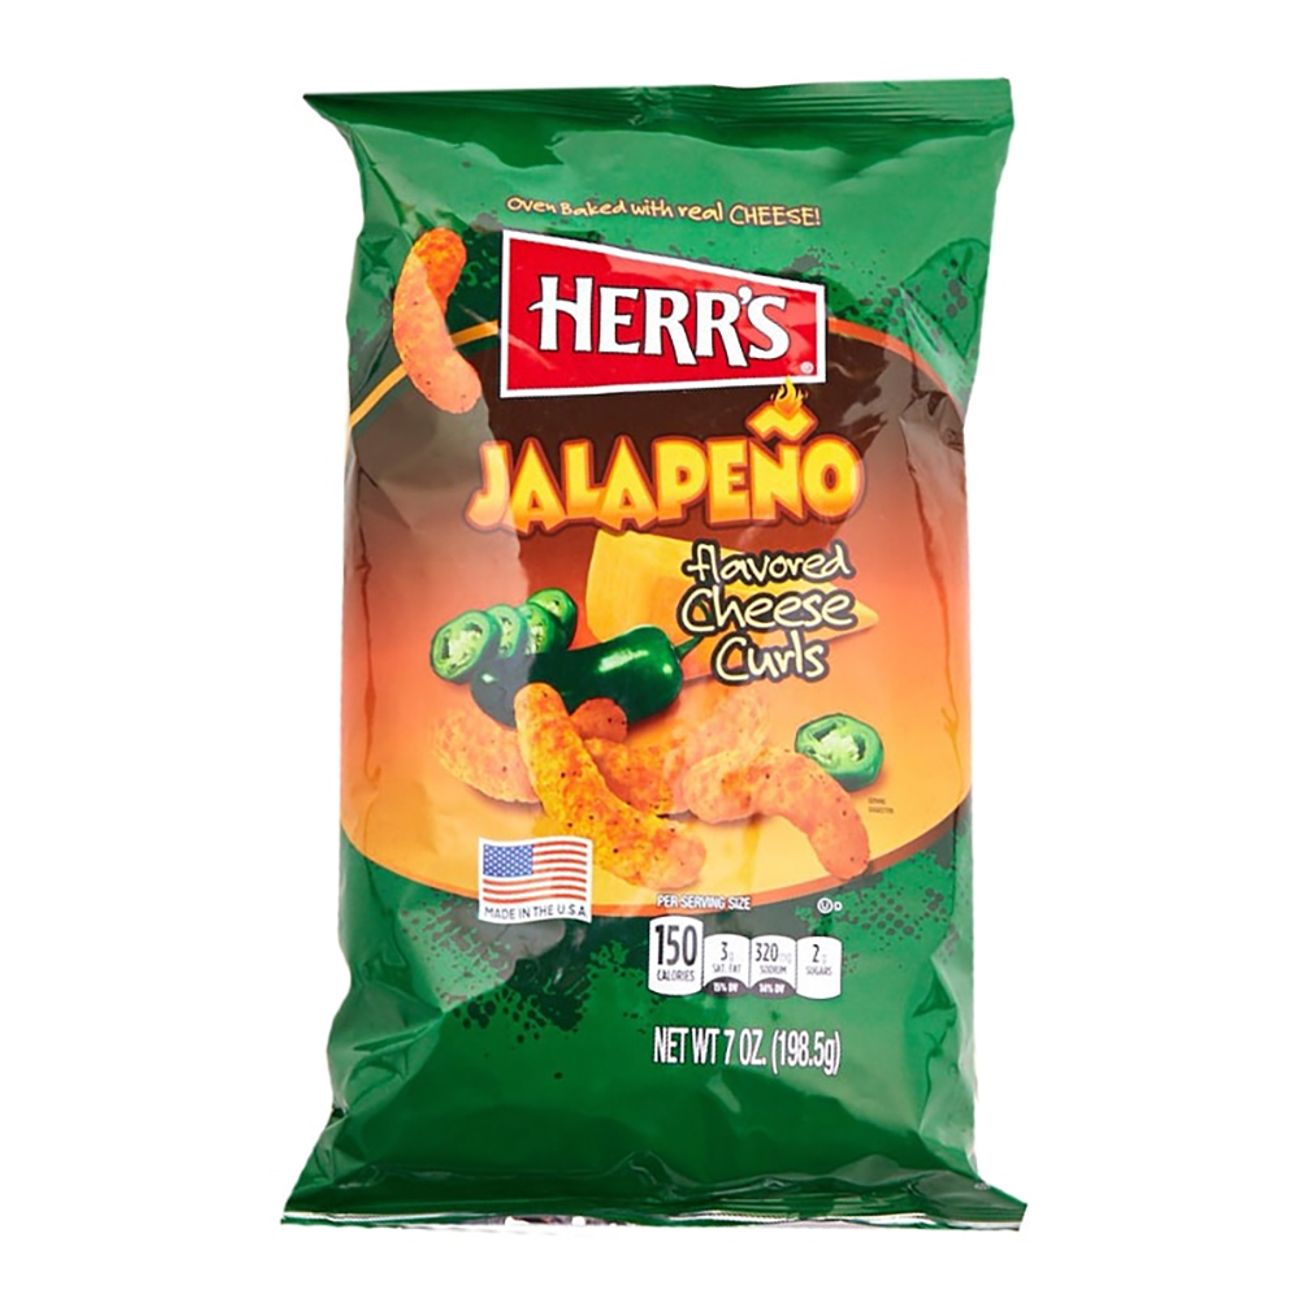 herrs-jalapeno-cheese-curls-74080-1